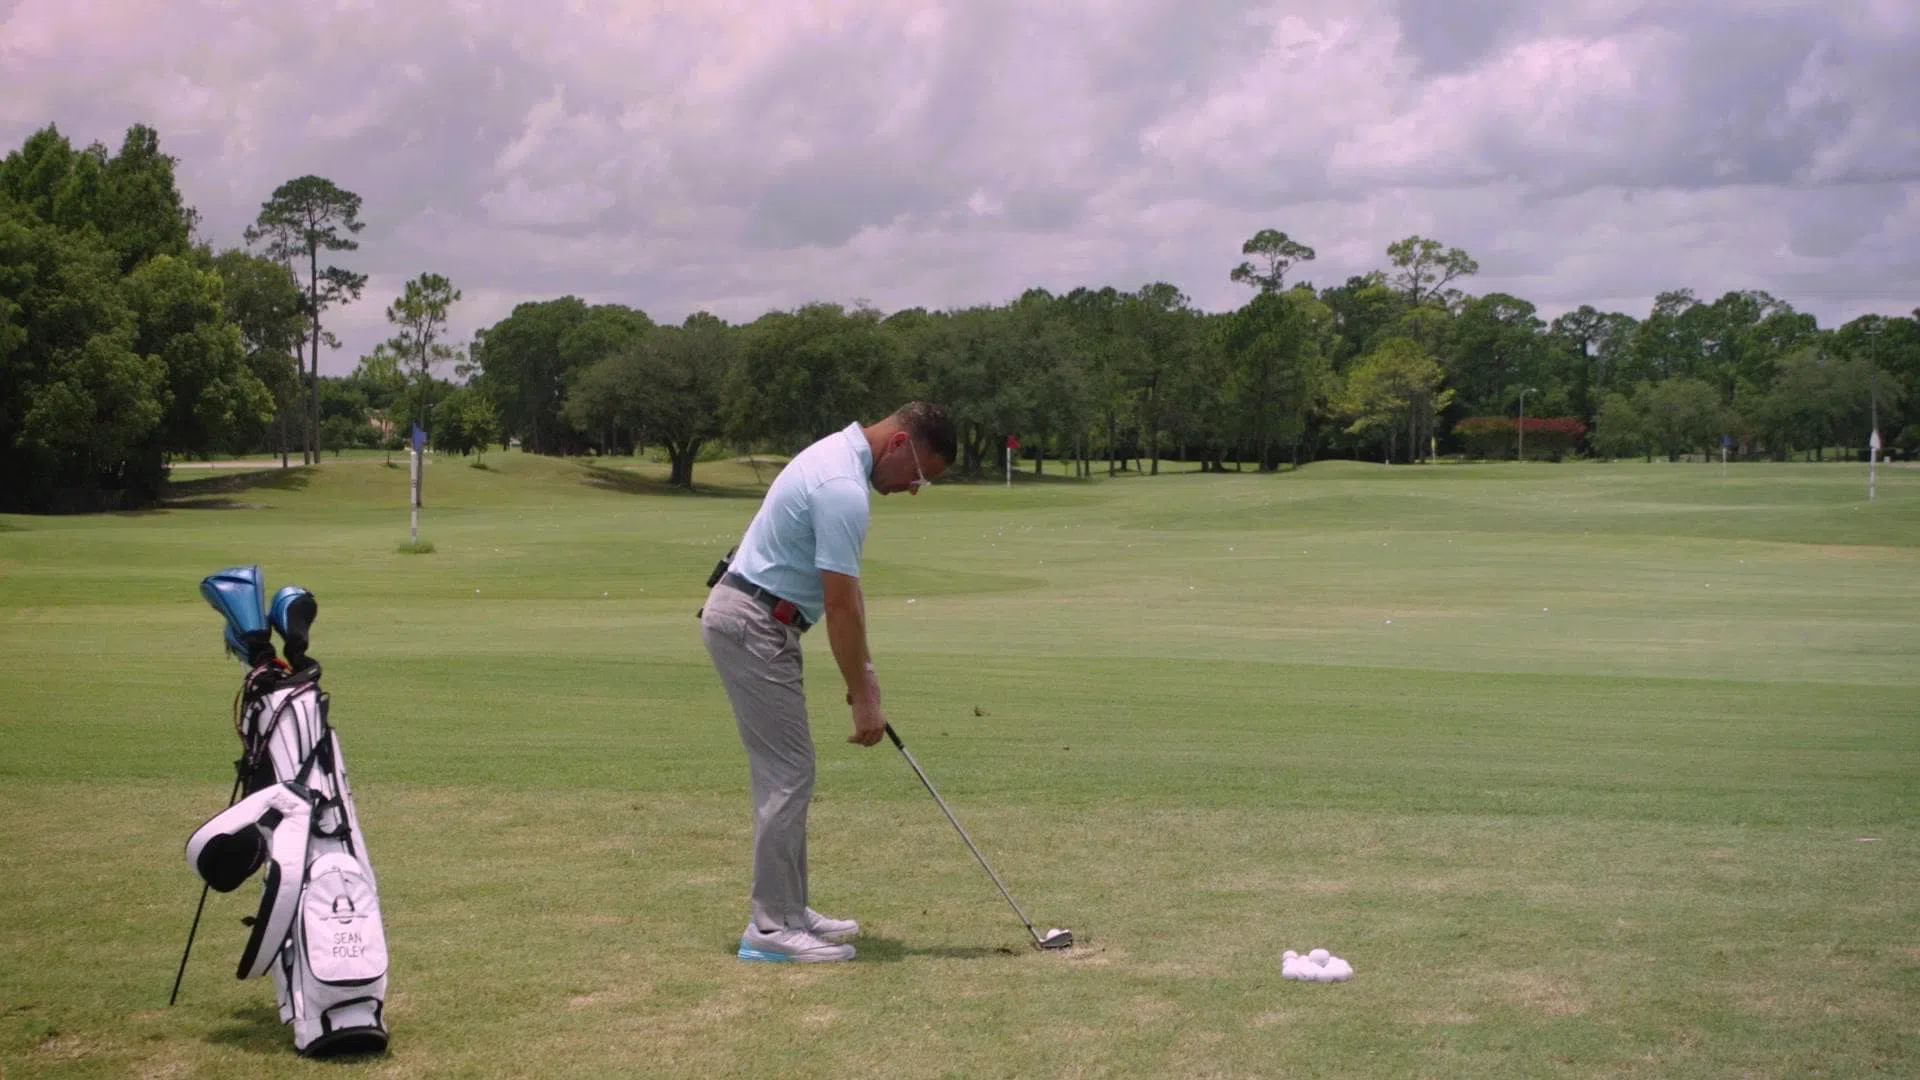 how far should you stand from your golf ball